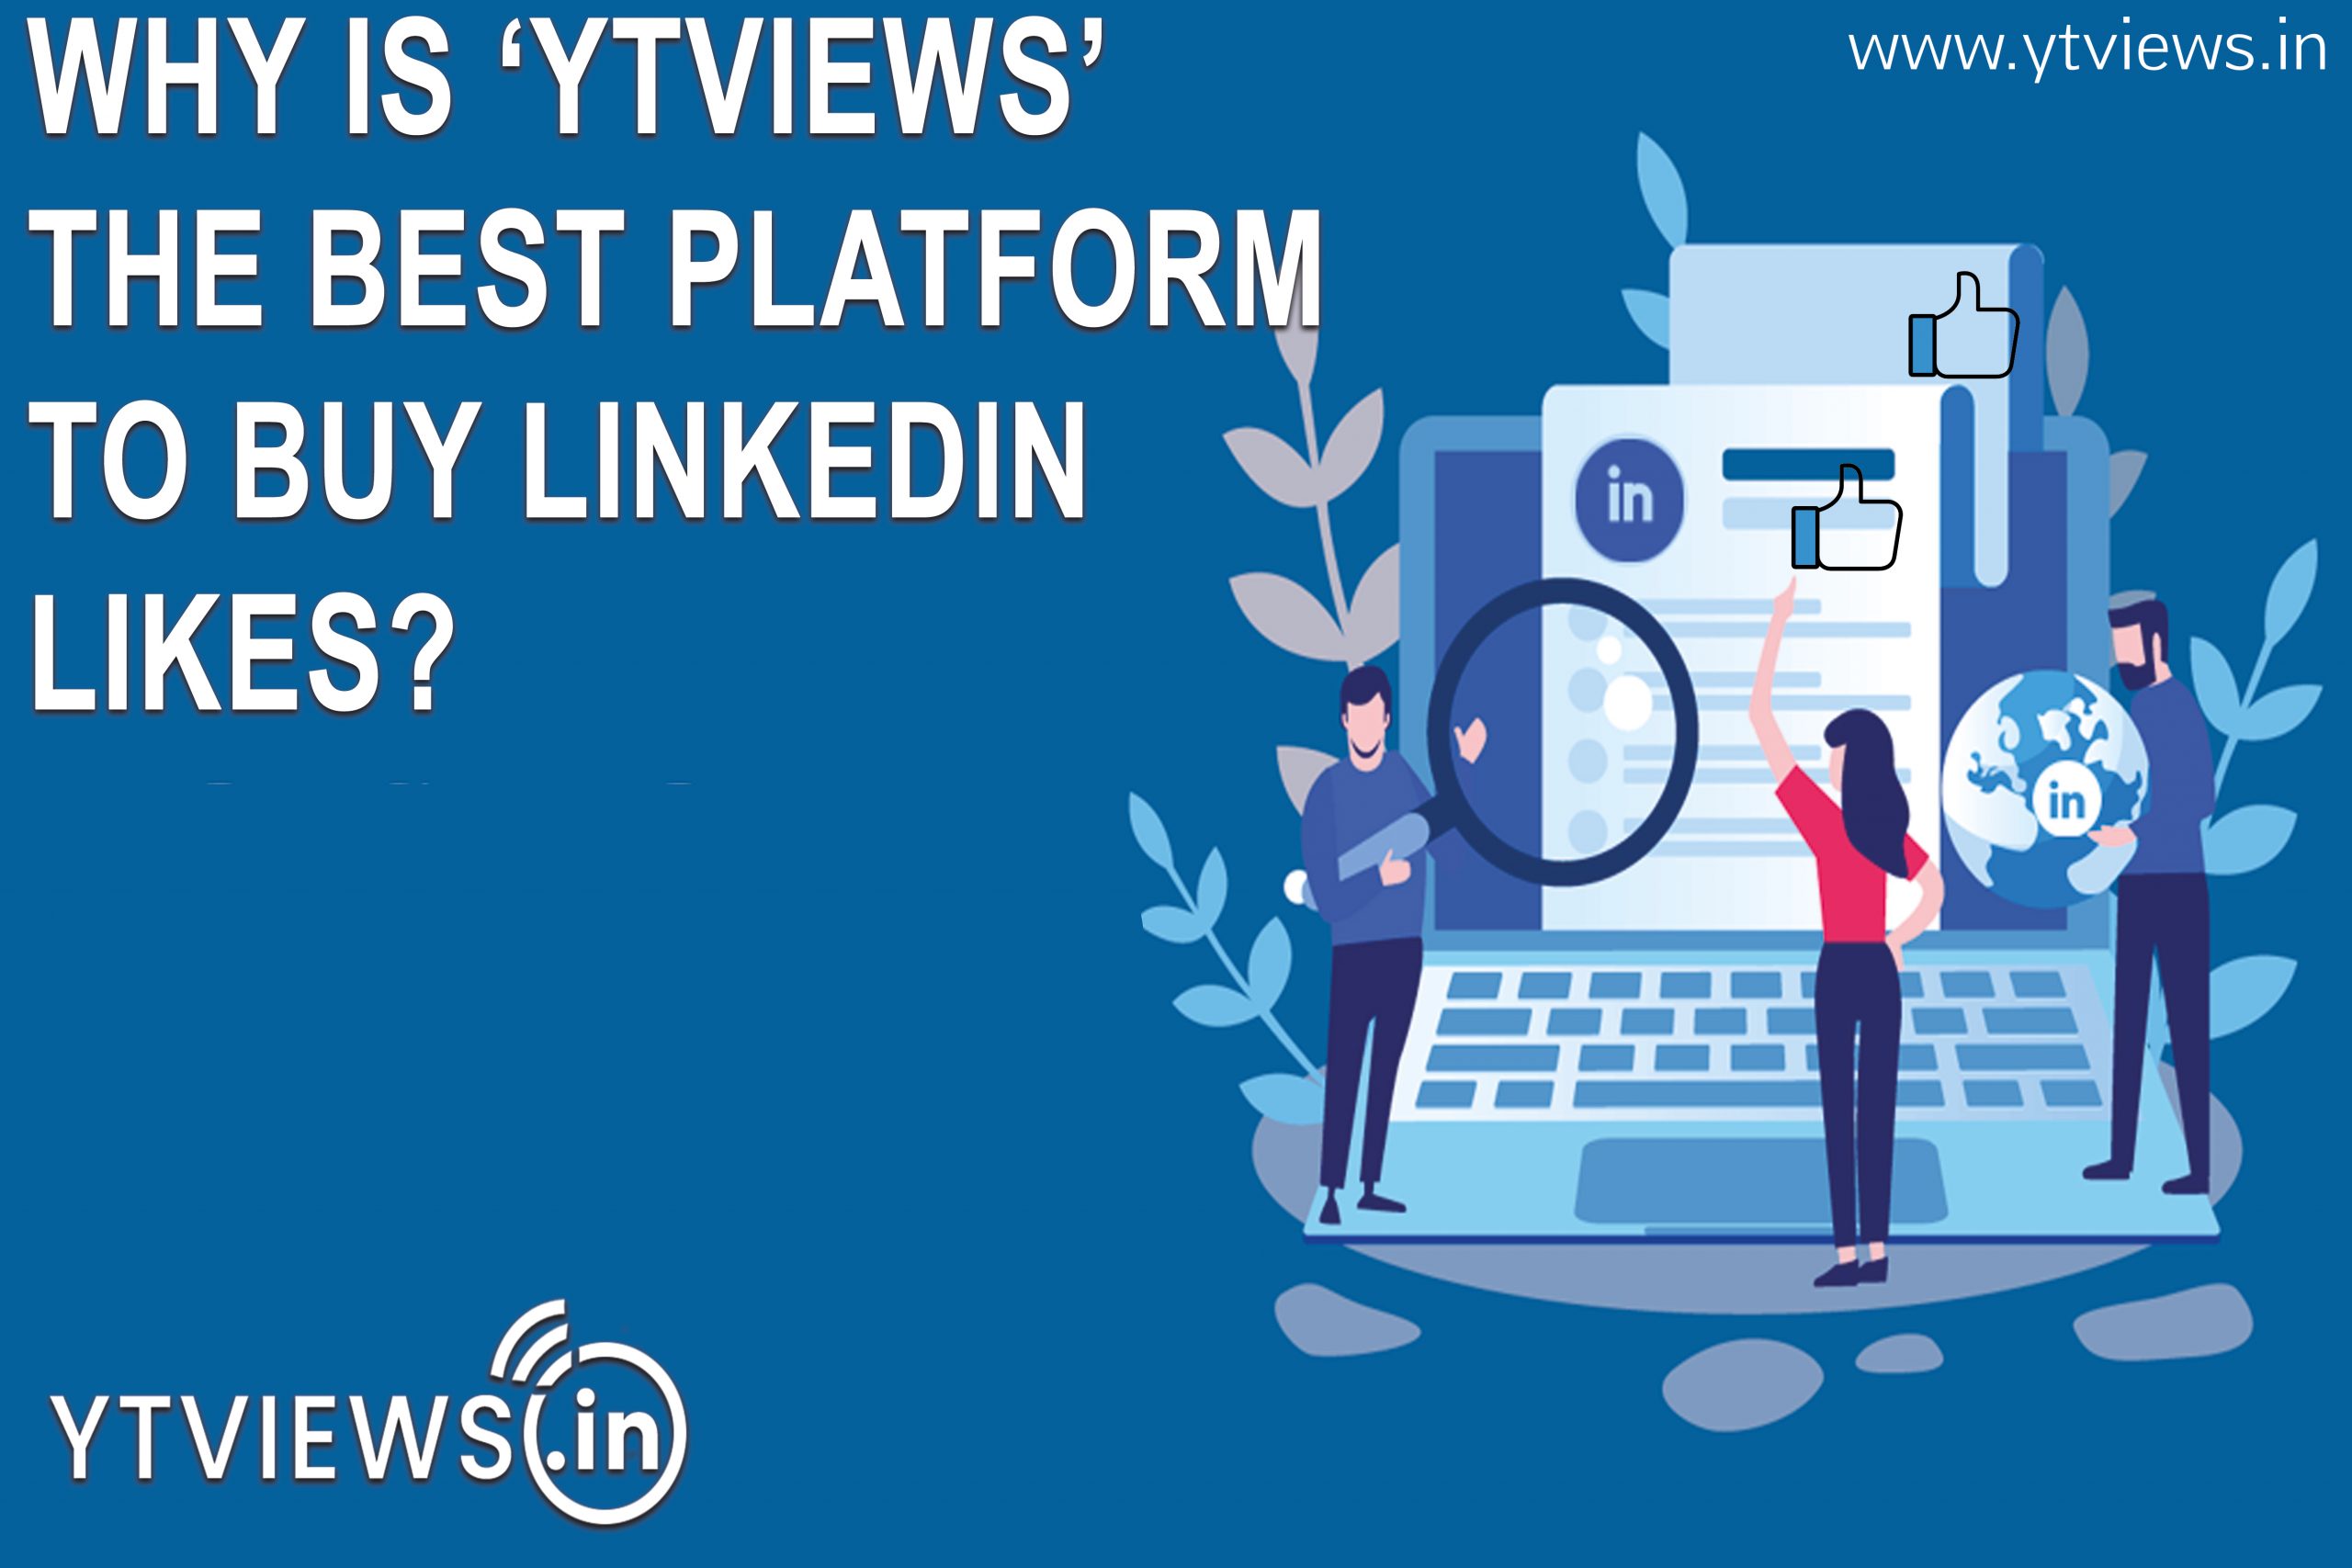 Why is Ytviews the best platform to buy LinkedIn likes?